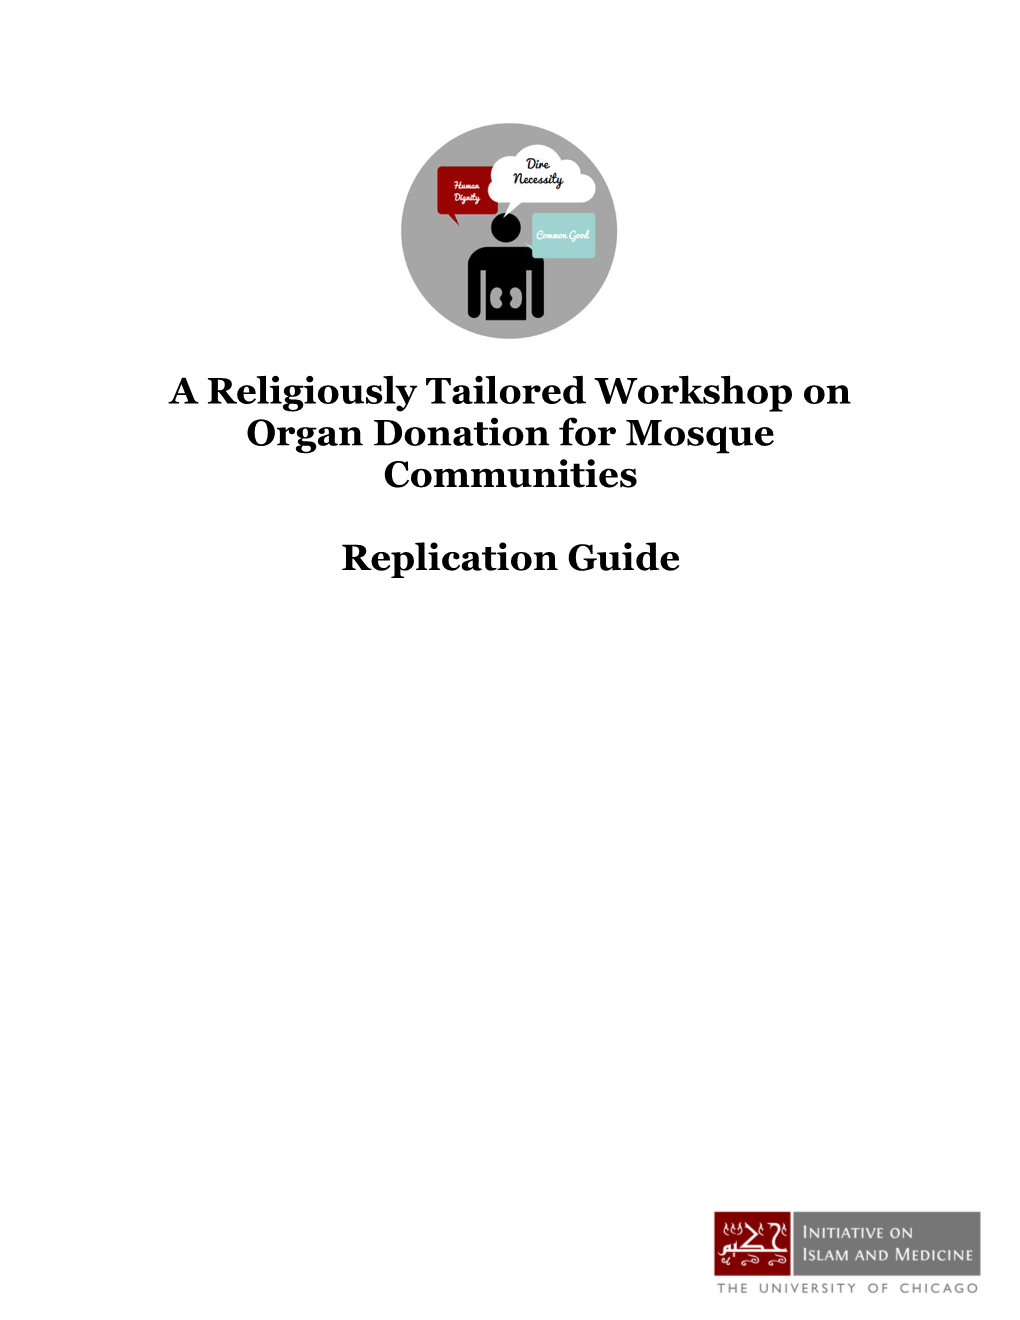 A Religiously Tailored Workshop on Organ Donation for Mosque Communities Replication Guide